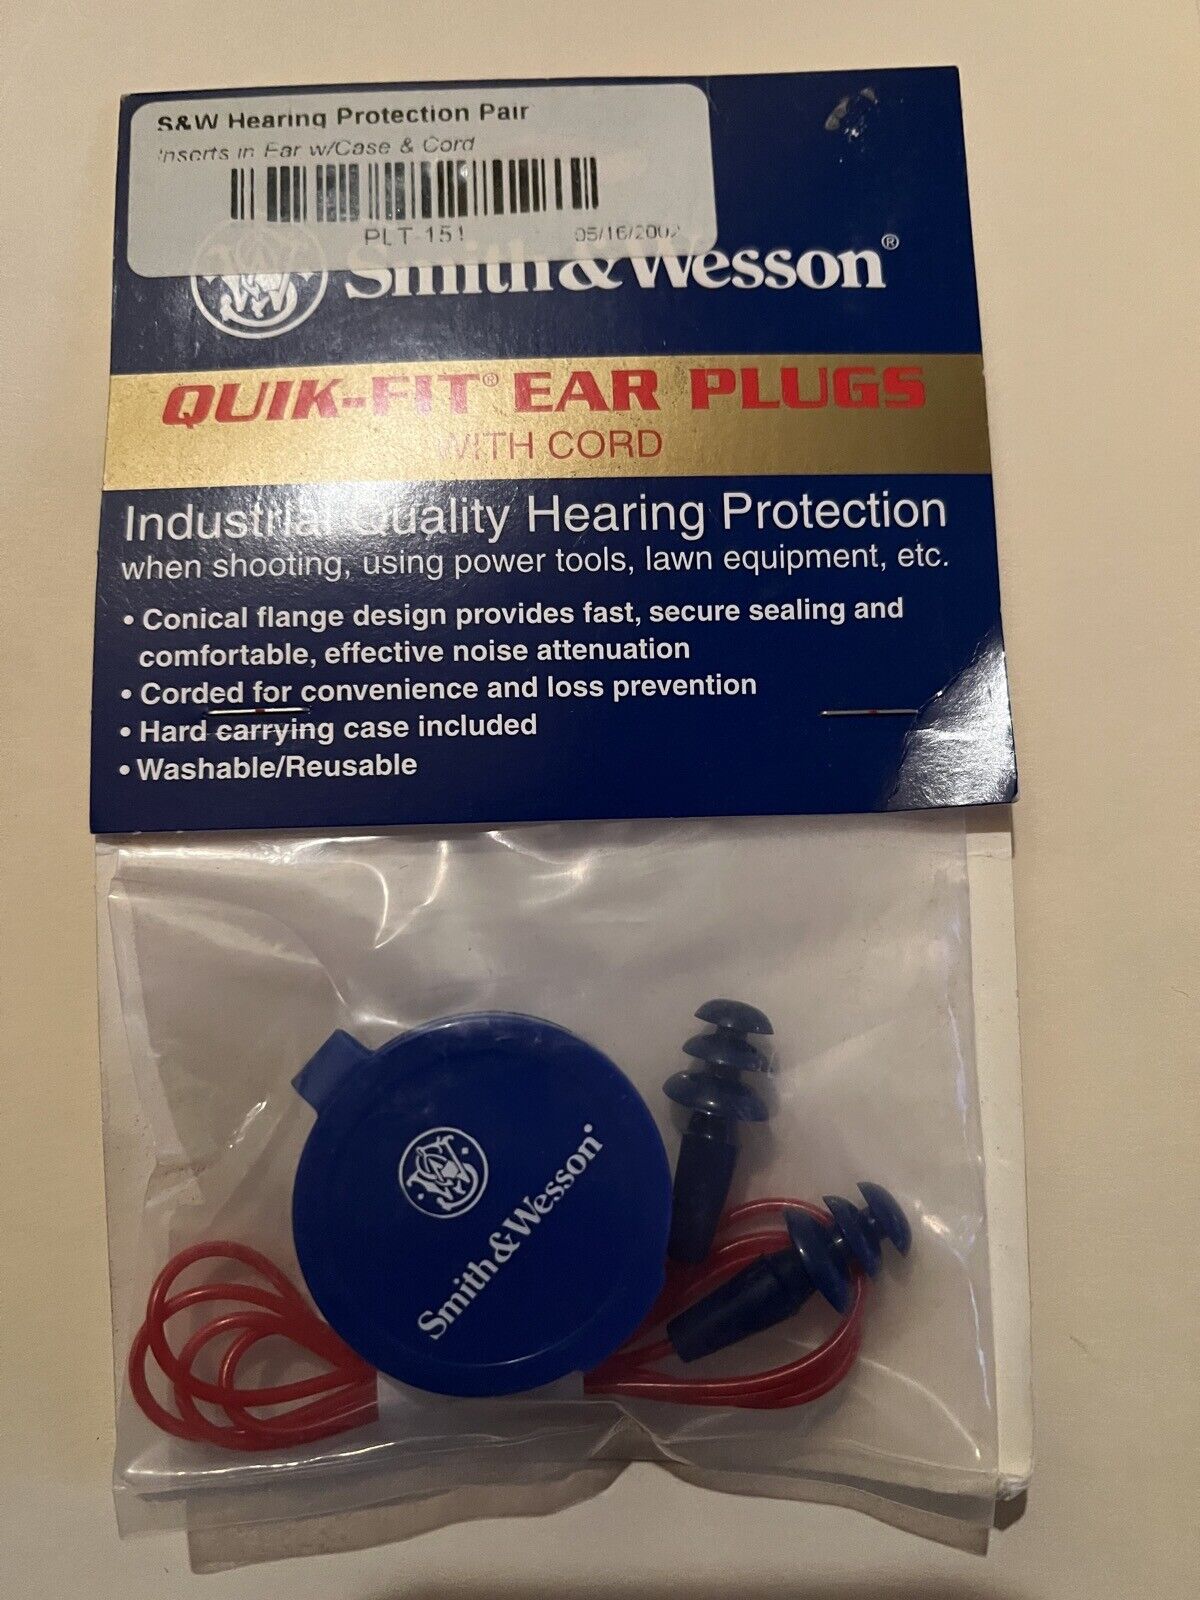 NEW S&W Smith & Wesson Quik-Fit Ear Plugs OLD STOCK From 2000 Hearing Protection